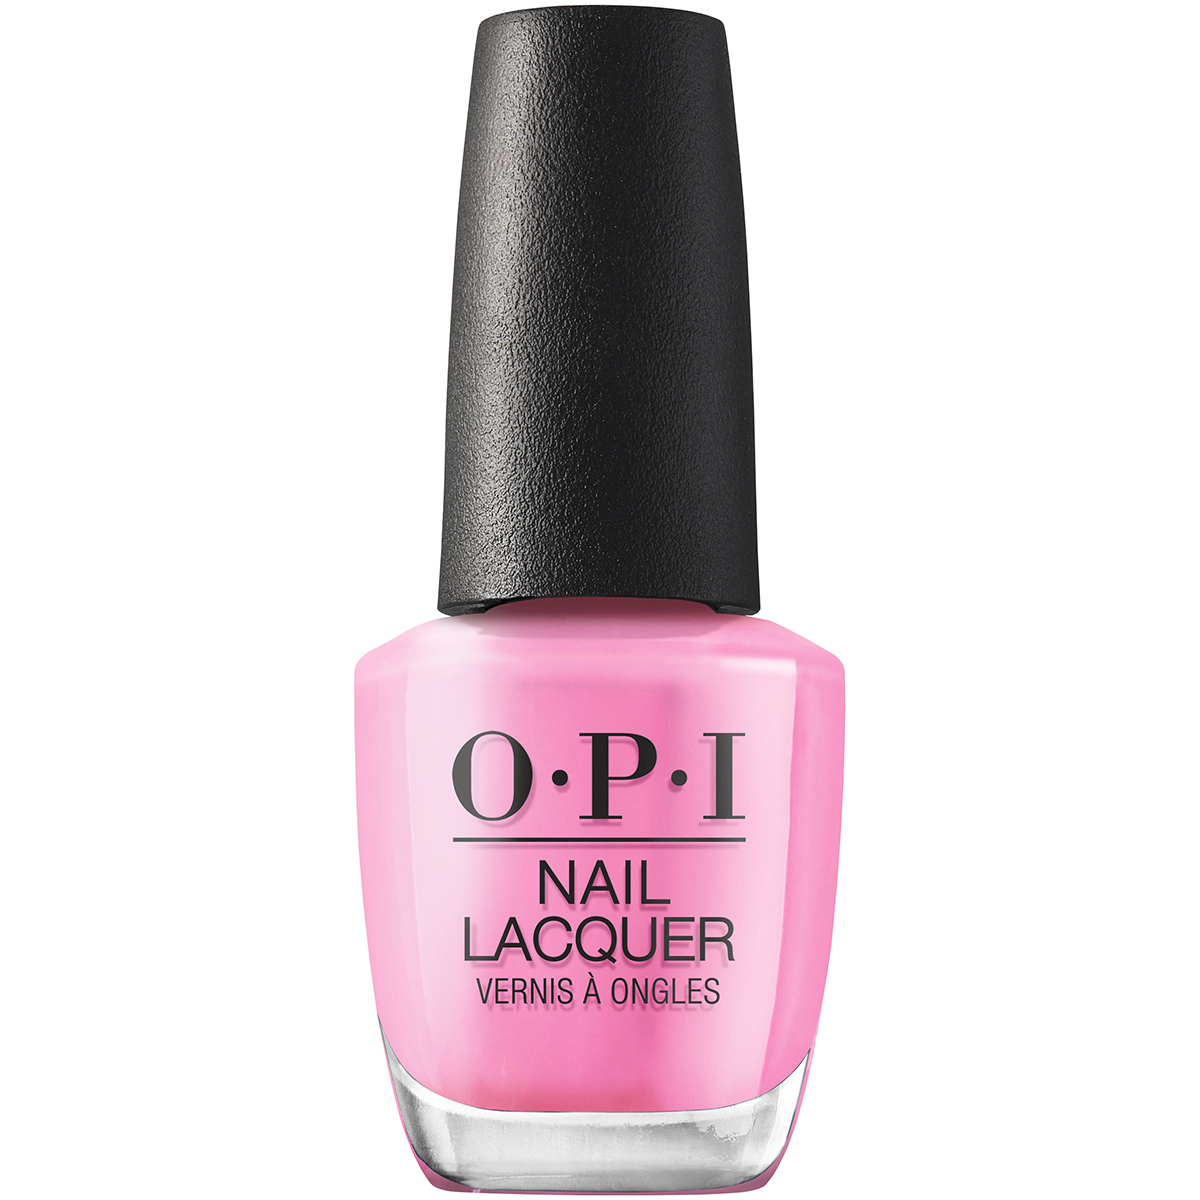 Lac de unghii Nail Lacquer Summer, Makeout-Side, 15 ml, Opi